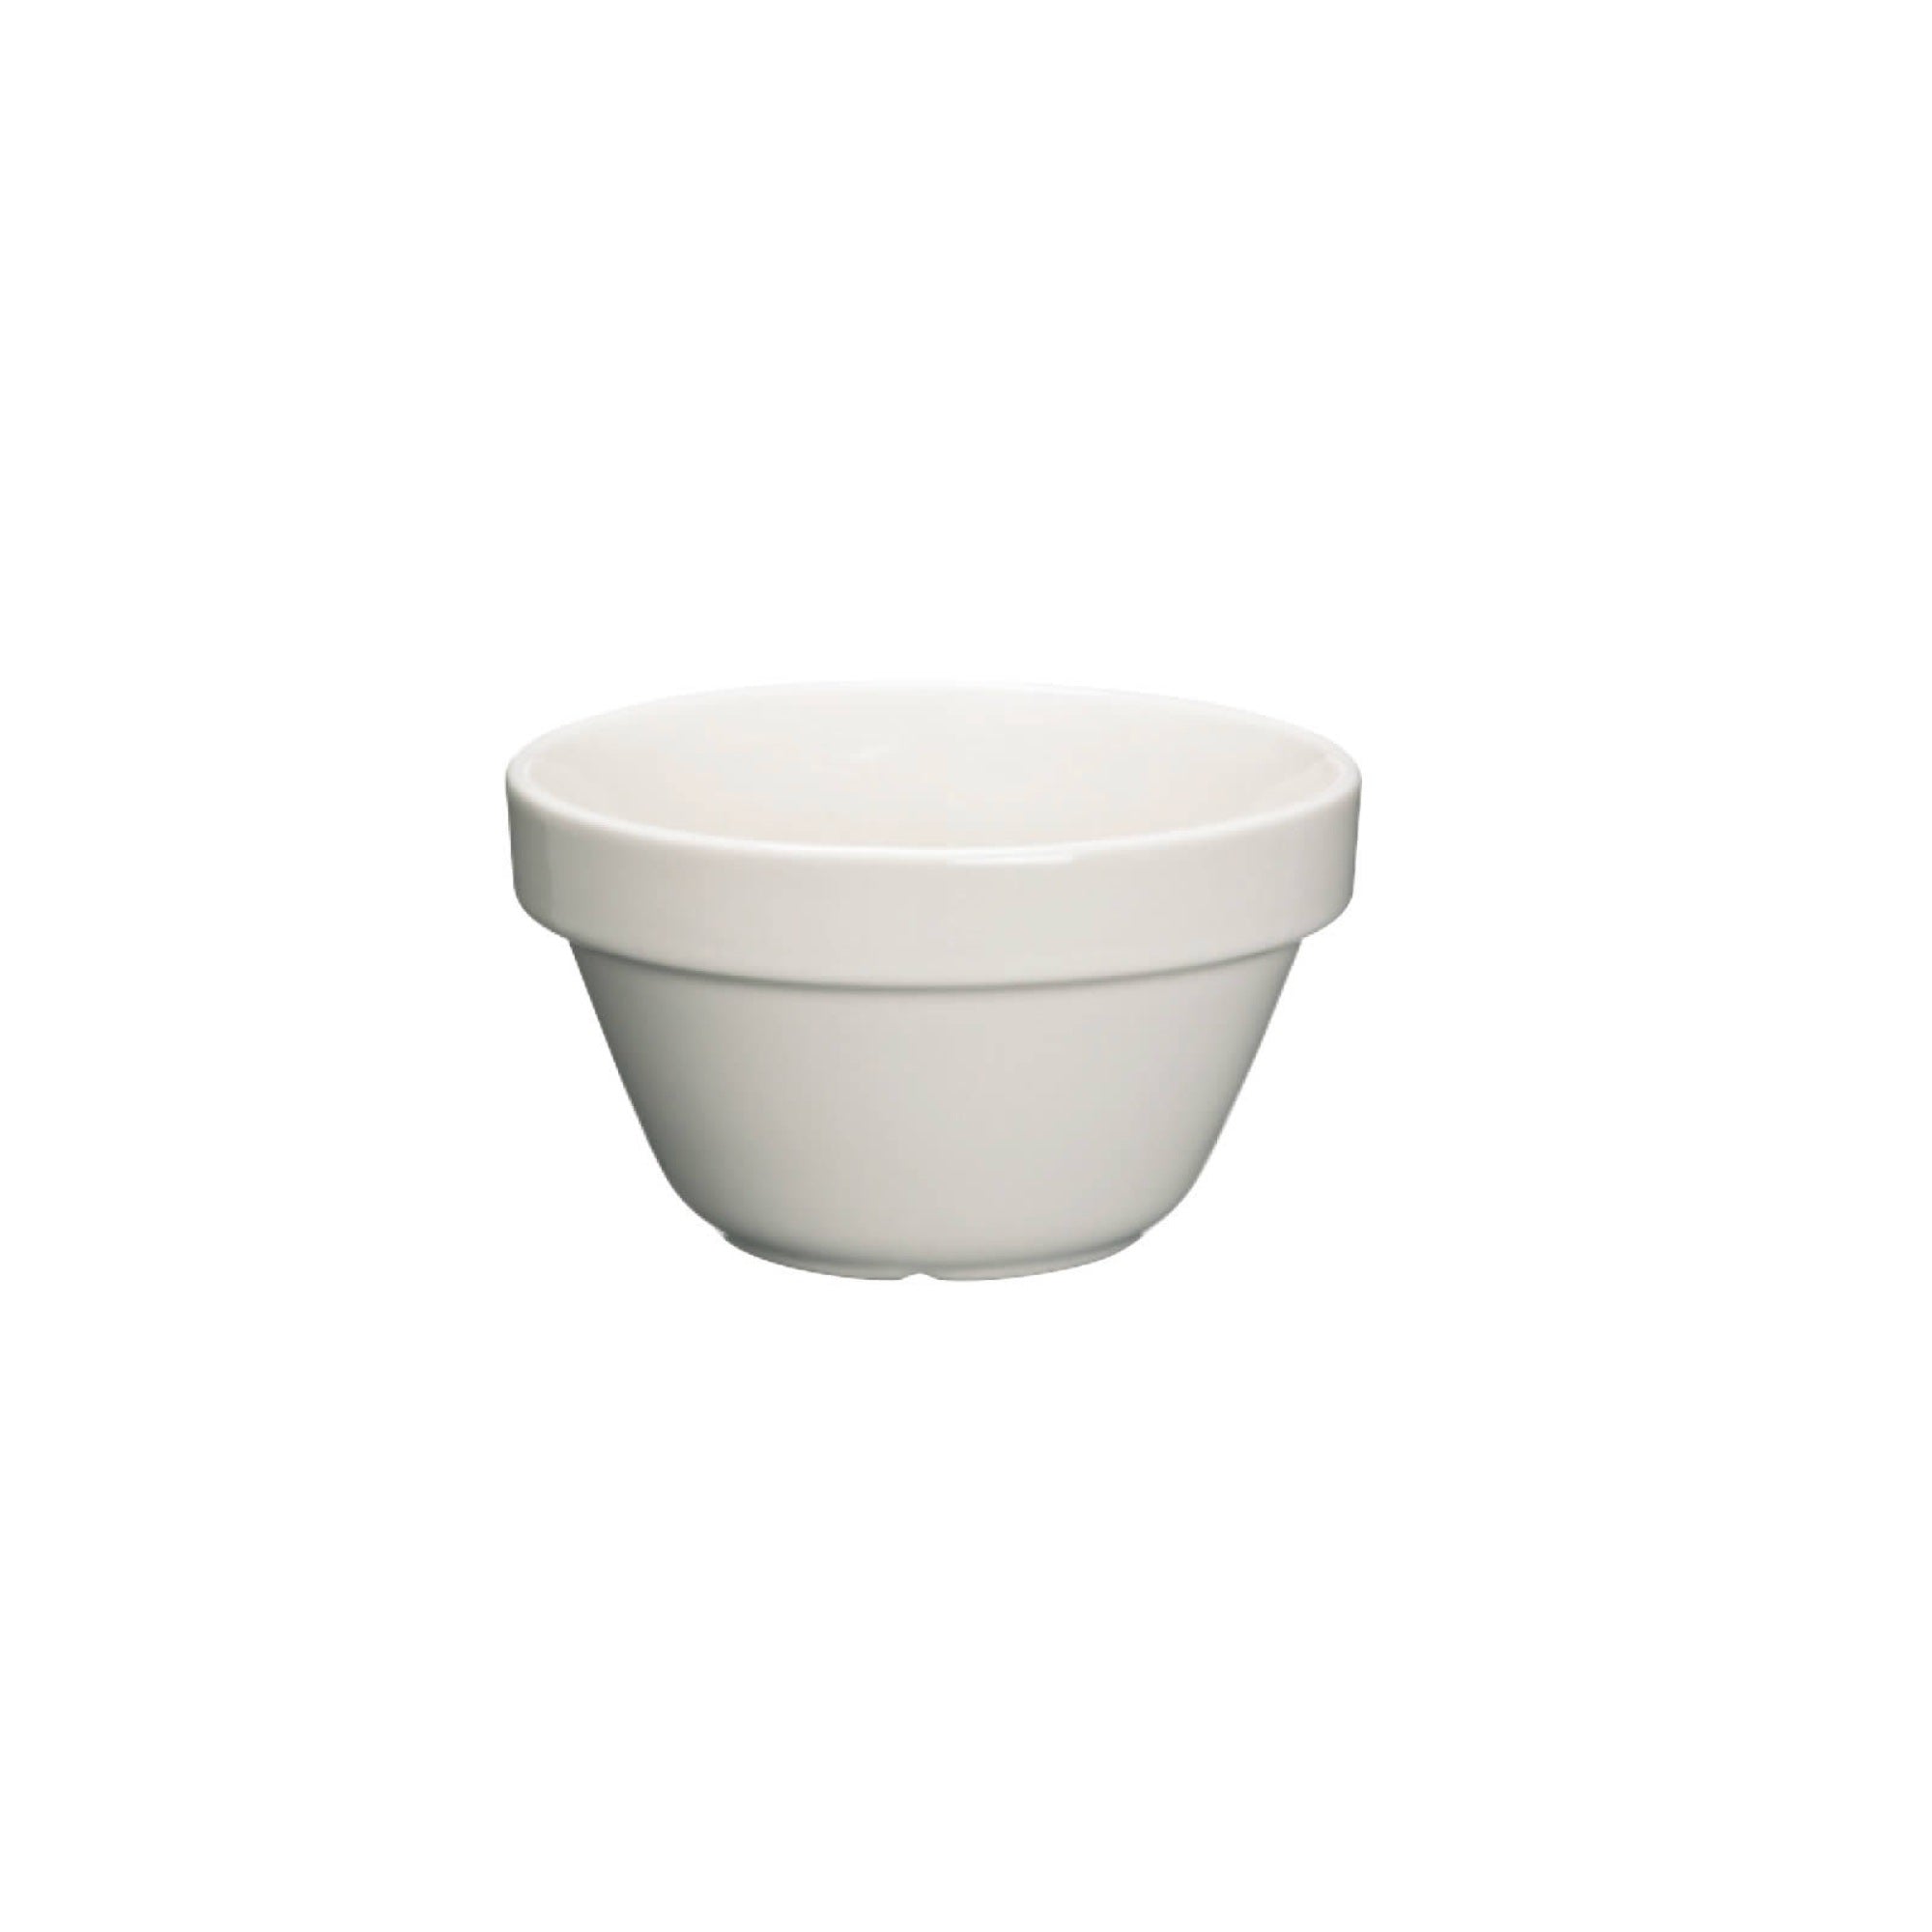 Home Made Traditional Stoneware 300ml Pudding Basin Bowl - The Cooks Cupboard Ltd